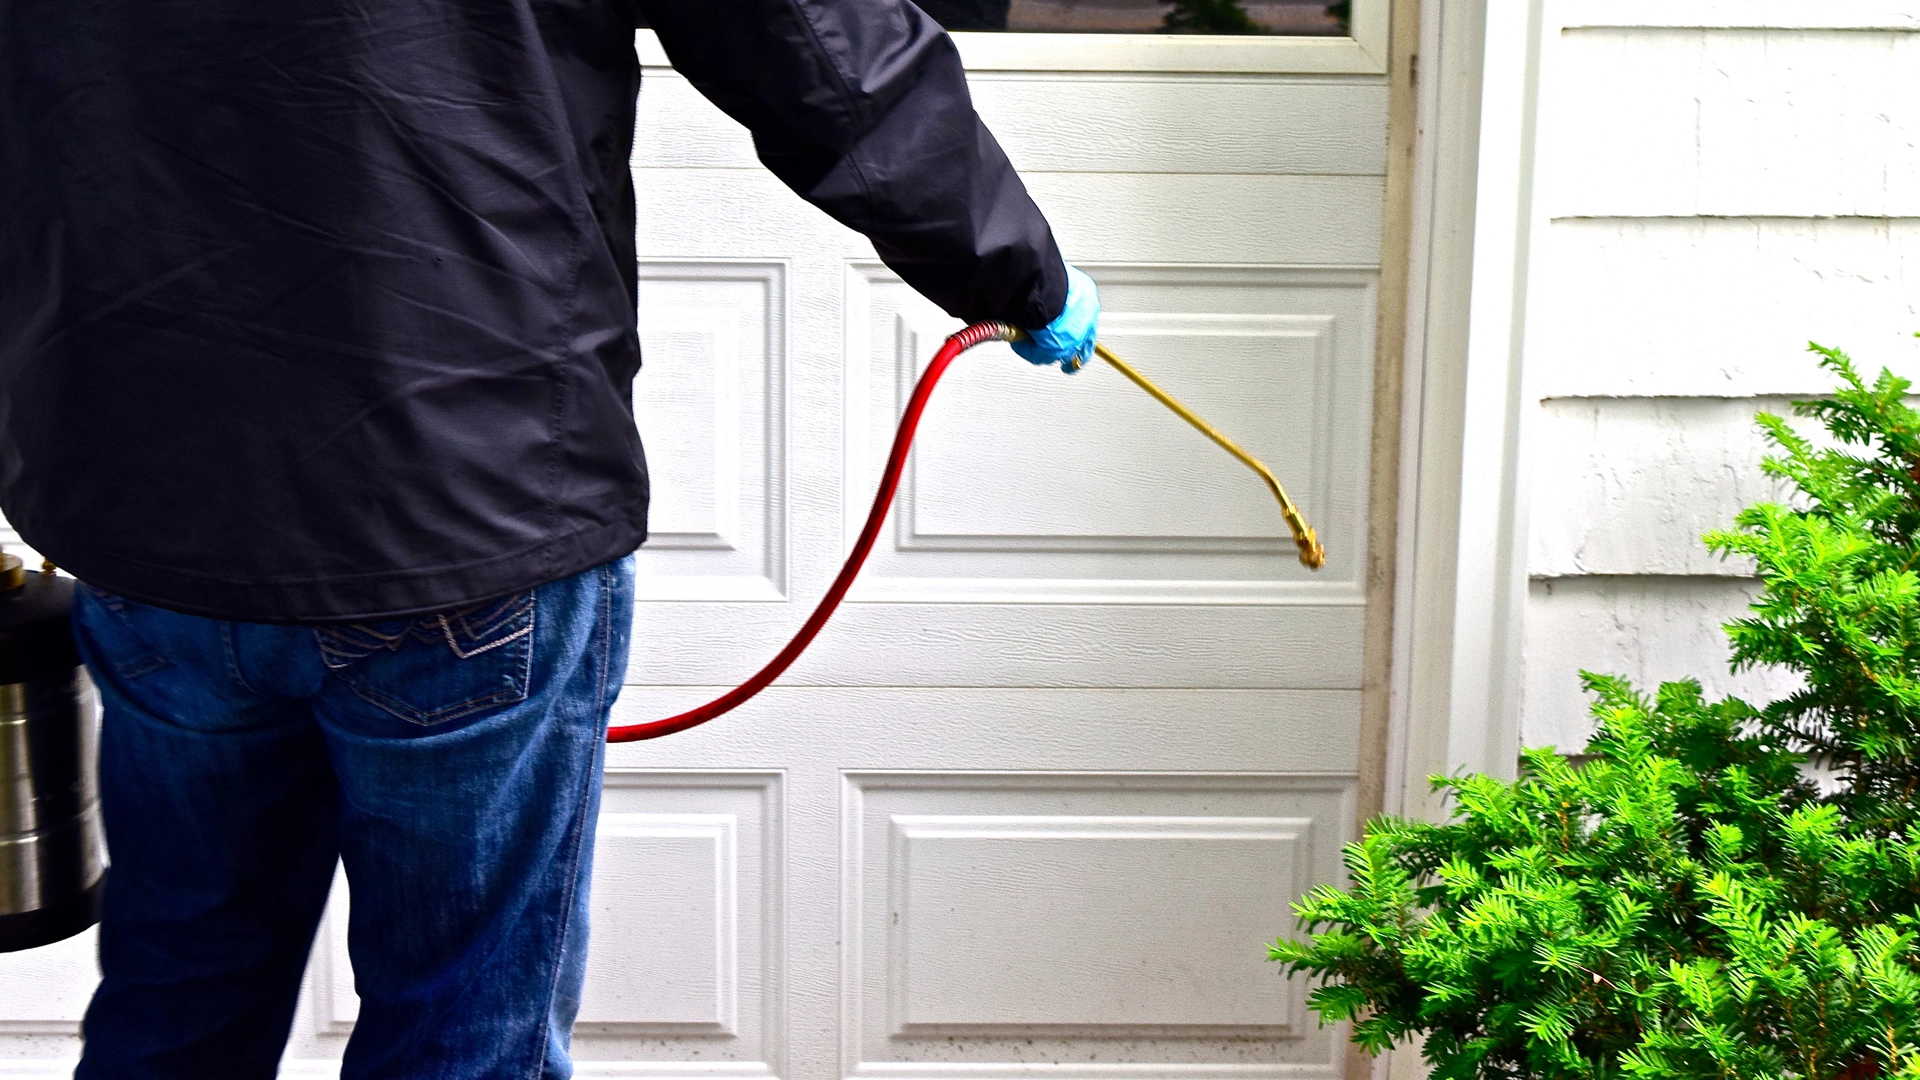 What a Homeowner Should Look for When Hiring an Exterminator